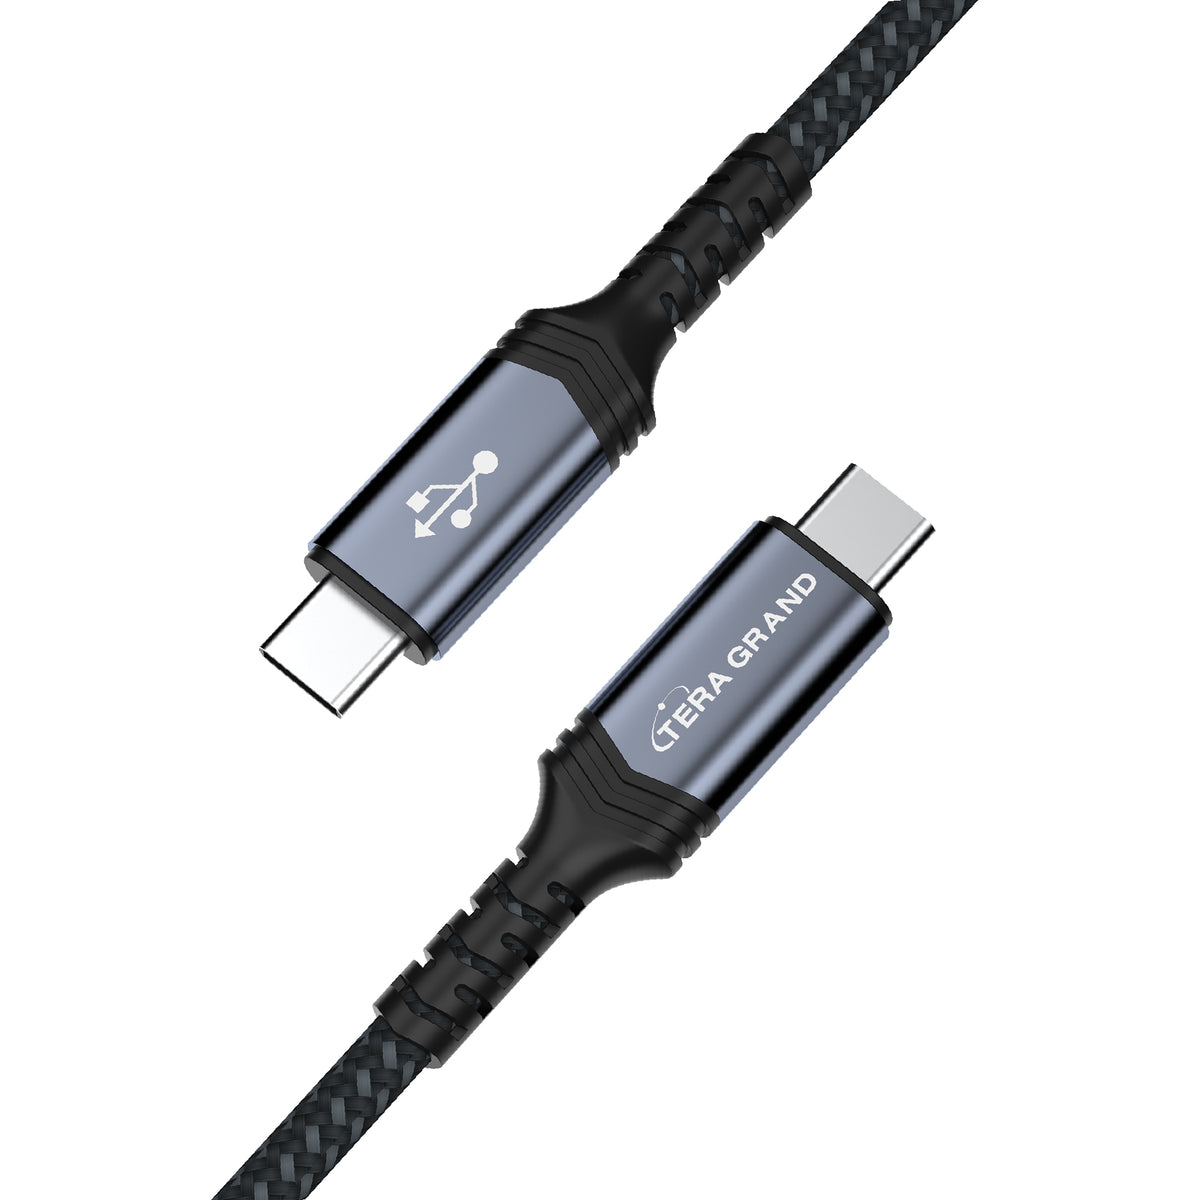 USB 2.0 USB-C to C with Lightning Adapter 2-in-1 Sync and Charge Cable —  Tera Grand